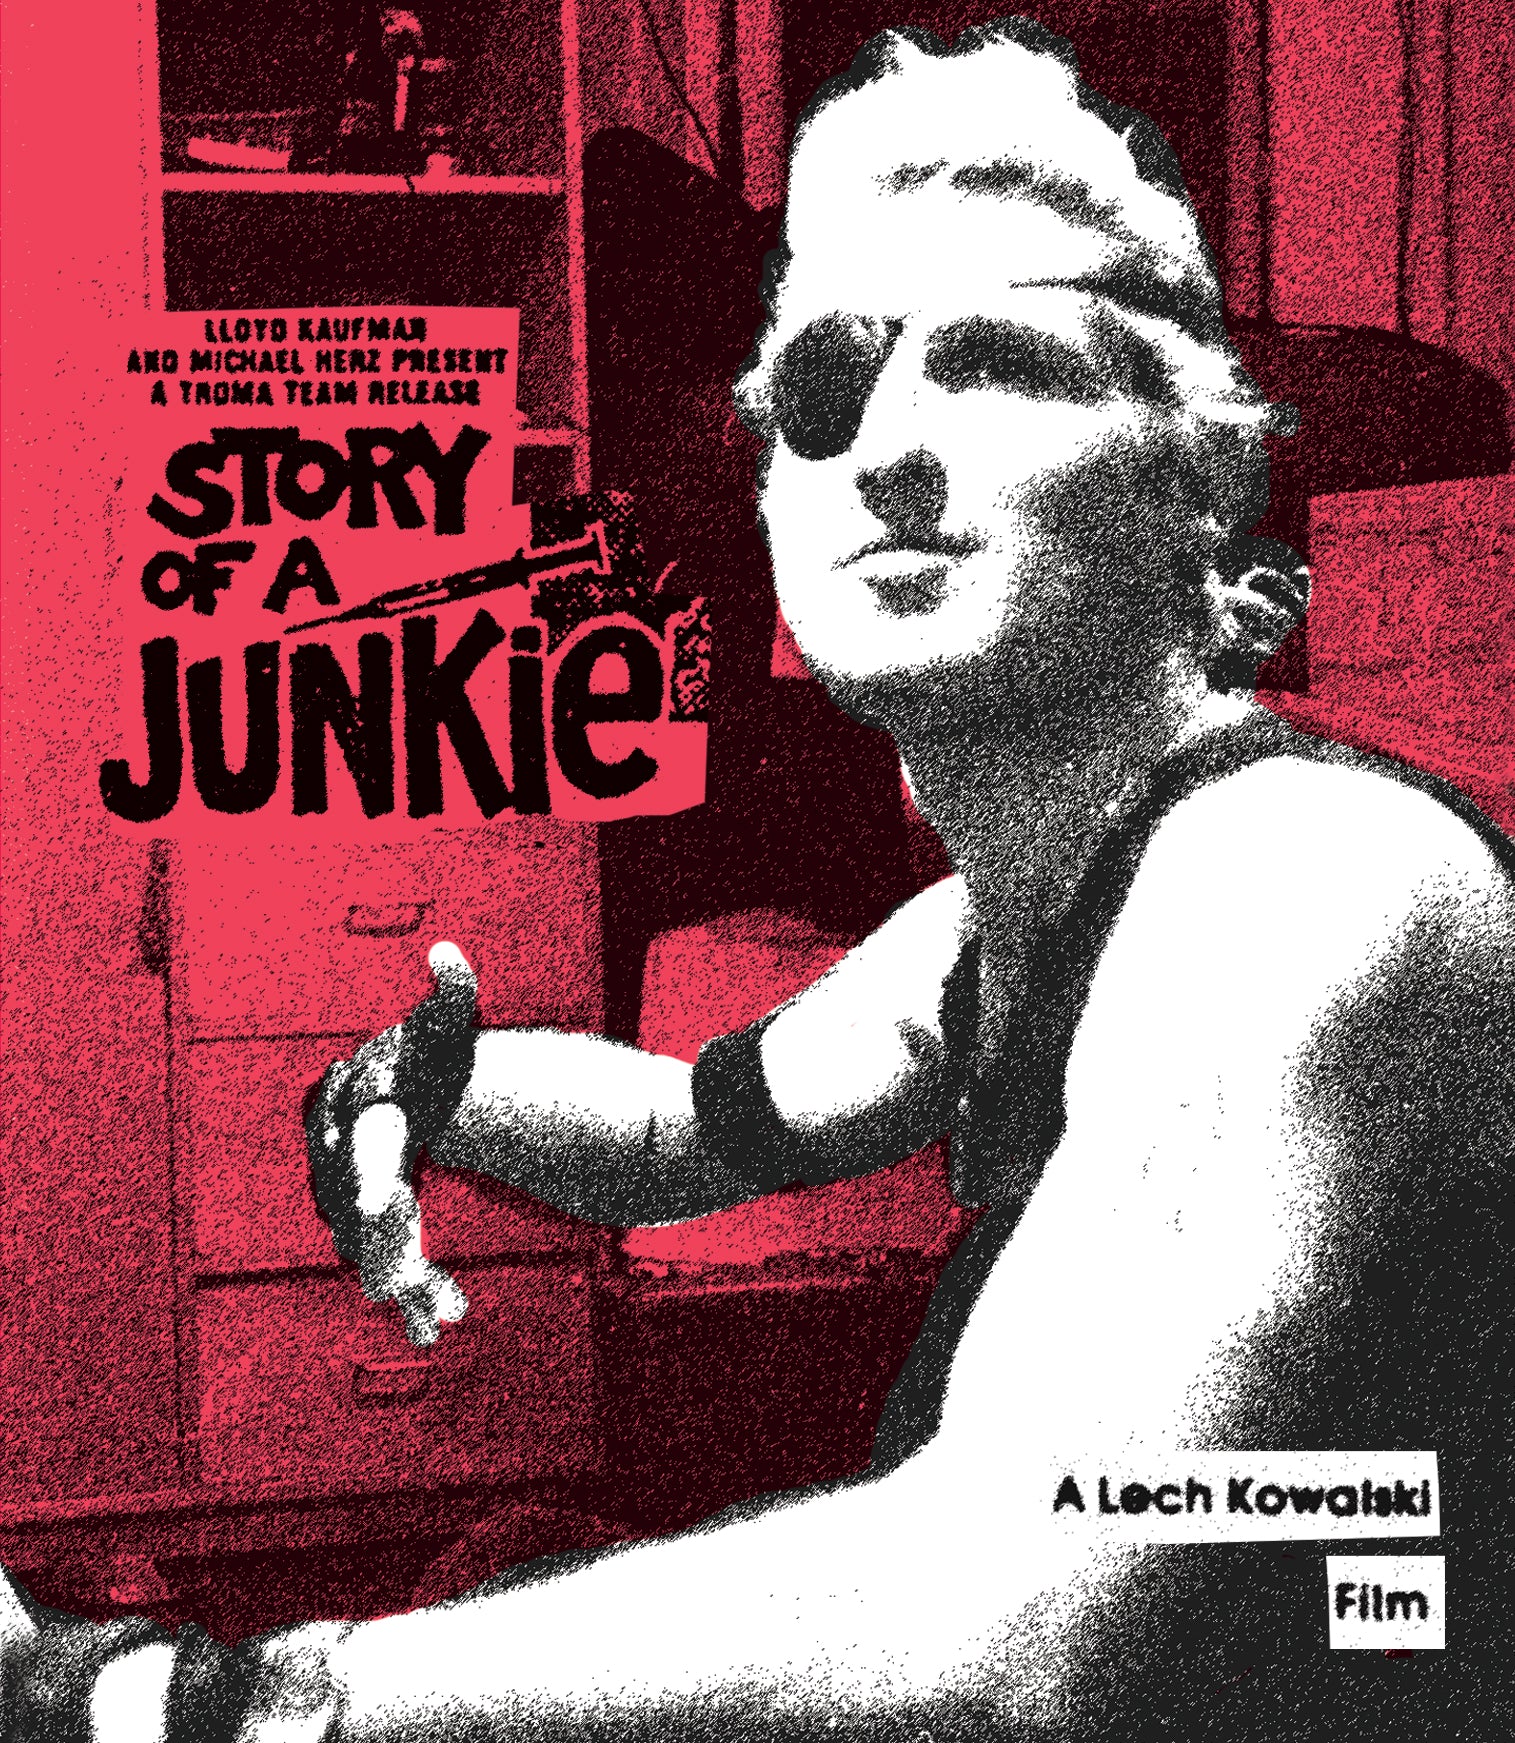 STORY OF A JUNKIE BLU-RAY/CD